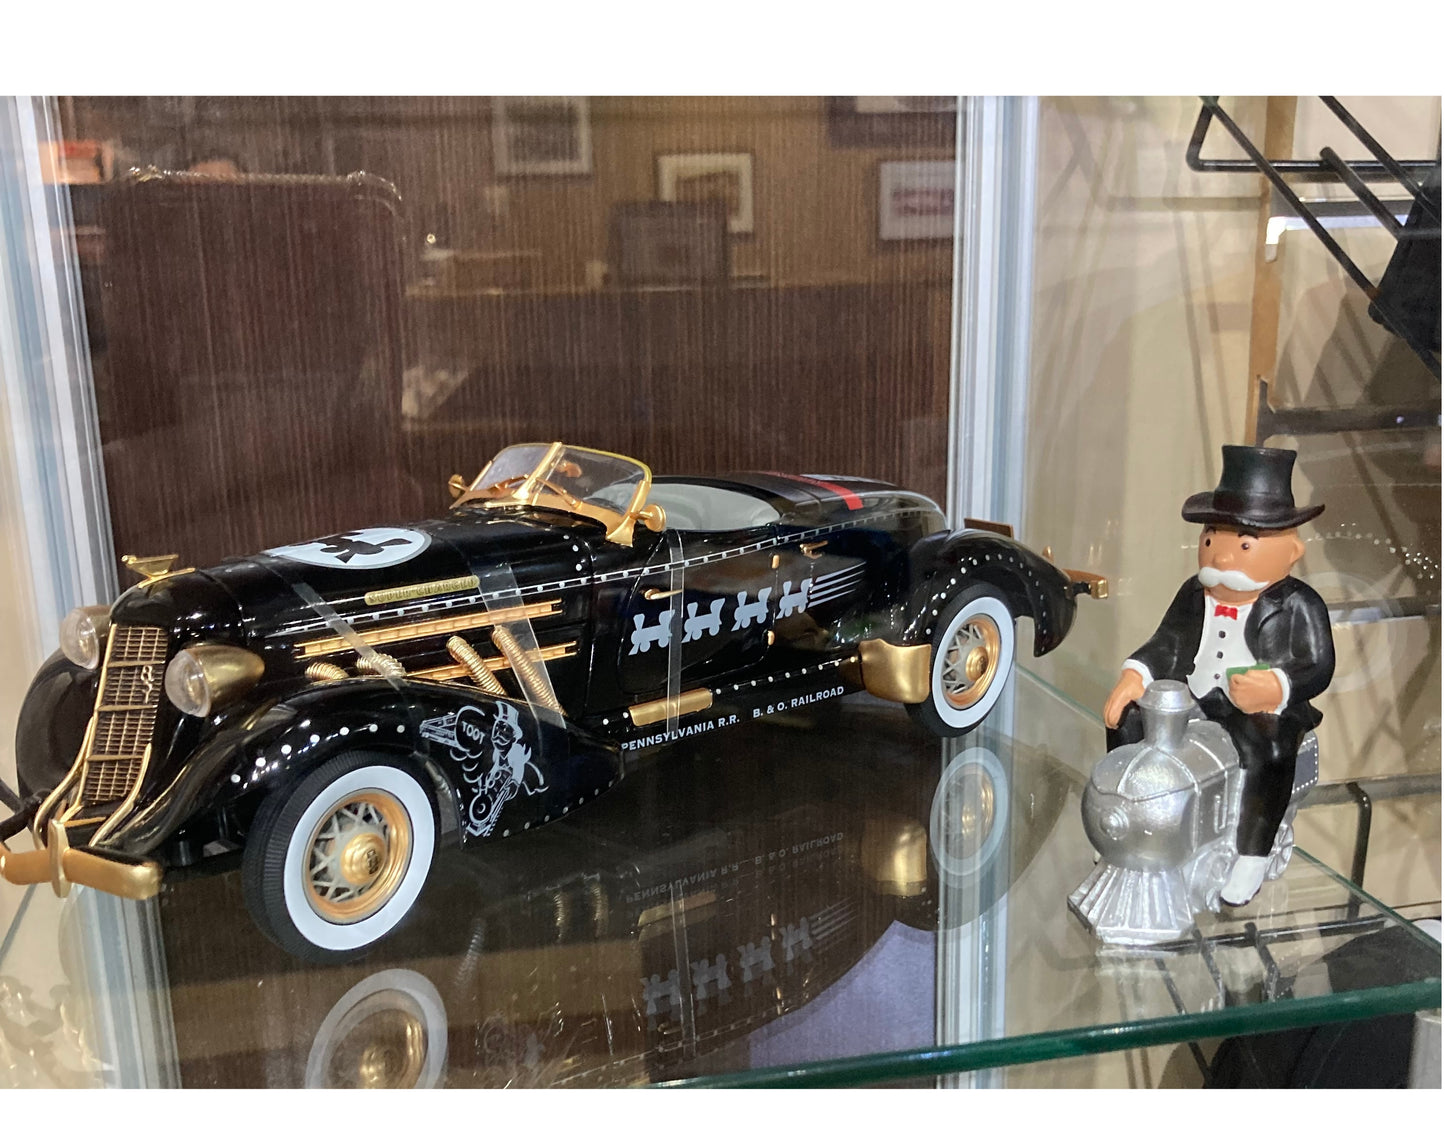 1:18 Monopoly 1935 Auburn 851 Speedster - Limited Edition ~ Limited Quantities